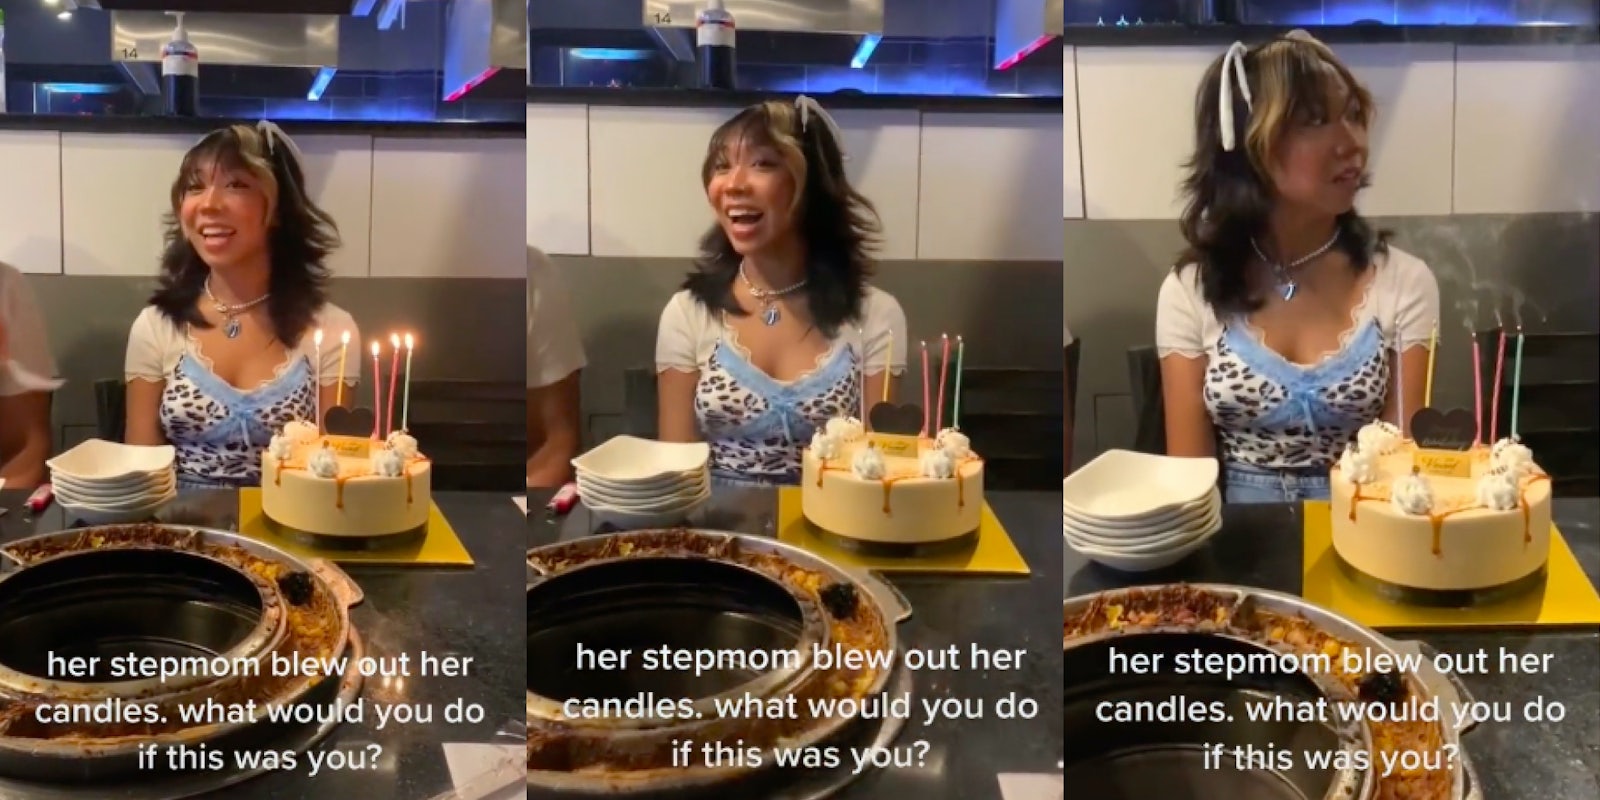 Stepmom blows out stepdaughter's candles